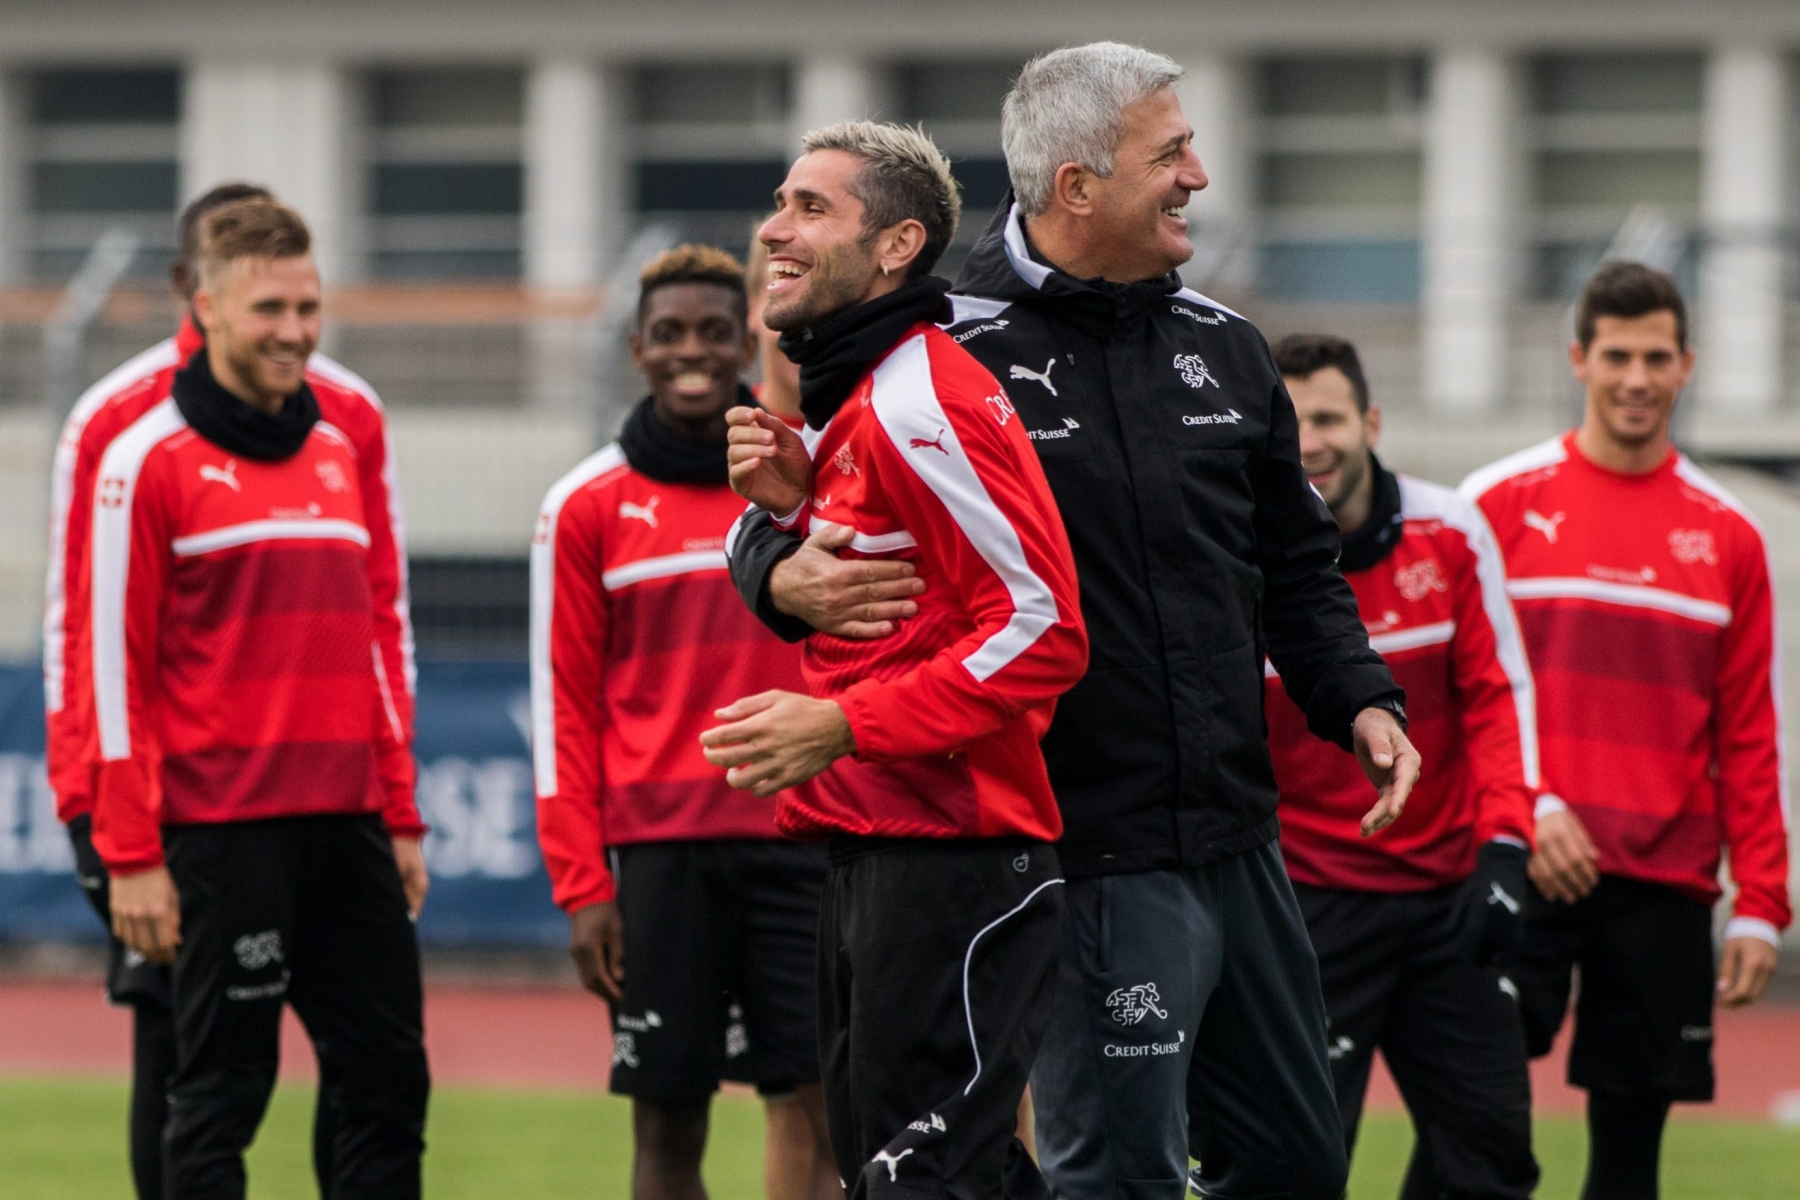 Switzerland's national soccer team with trainer Vladimir Petkovic, right, and Valon Behrami, left, during a training session in Lugano, Switzerland, on Friday, November 11, 2016. Switzerland is scheduled to play a 2018 Fifa World Cup Russia group B qualification soccer match against Faroe Islands on Sunday, November 13, 2016. (KEYSTONE/Ti-Press/Samuel Golay) FUSSBALL WM 2018 QUALIFIKATION TEAM SCHWEIZ TRAINING